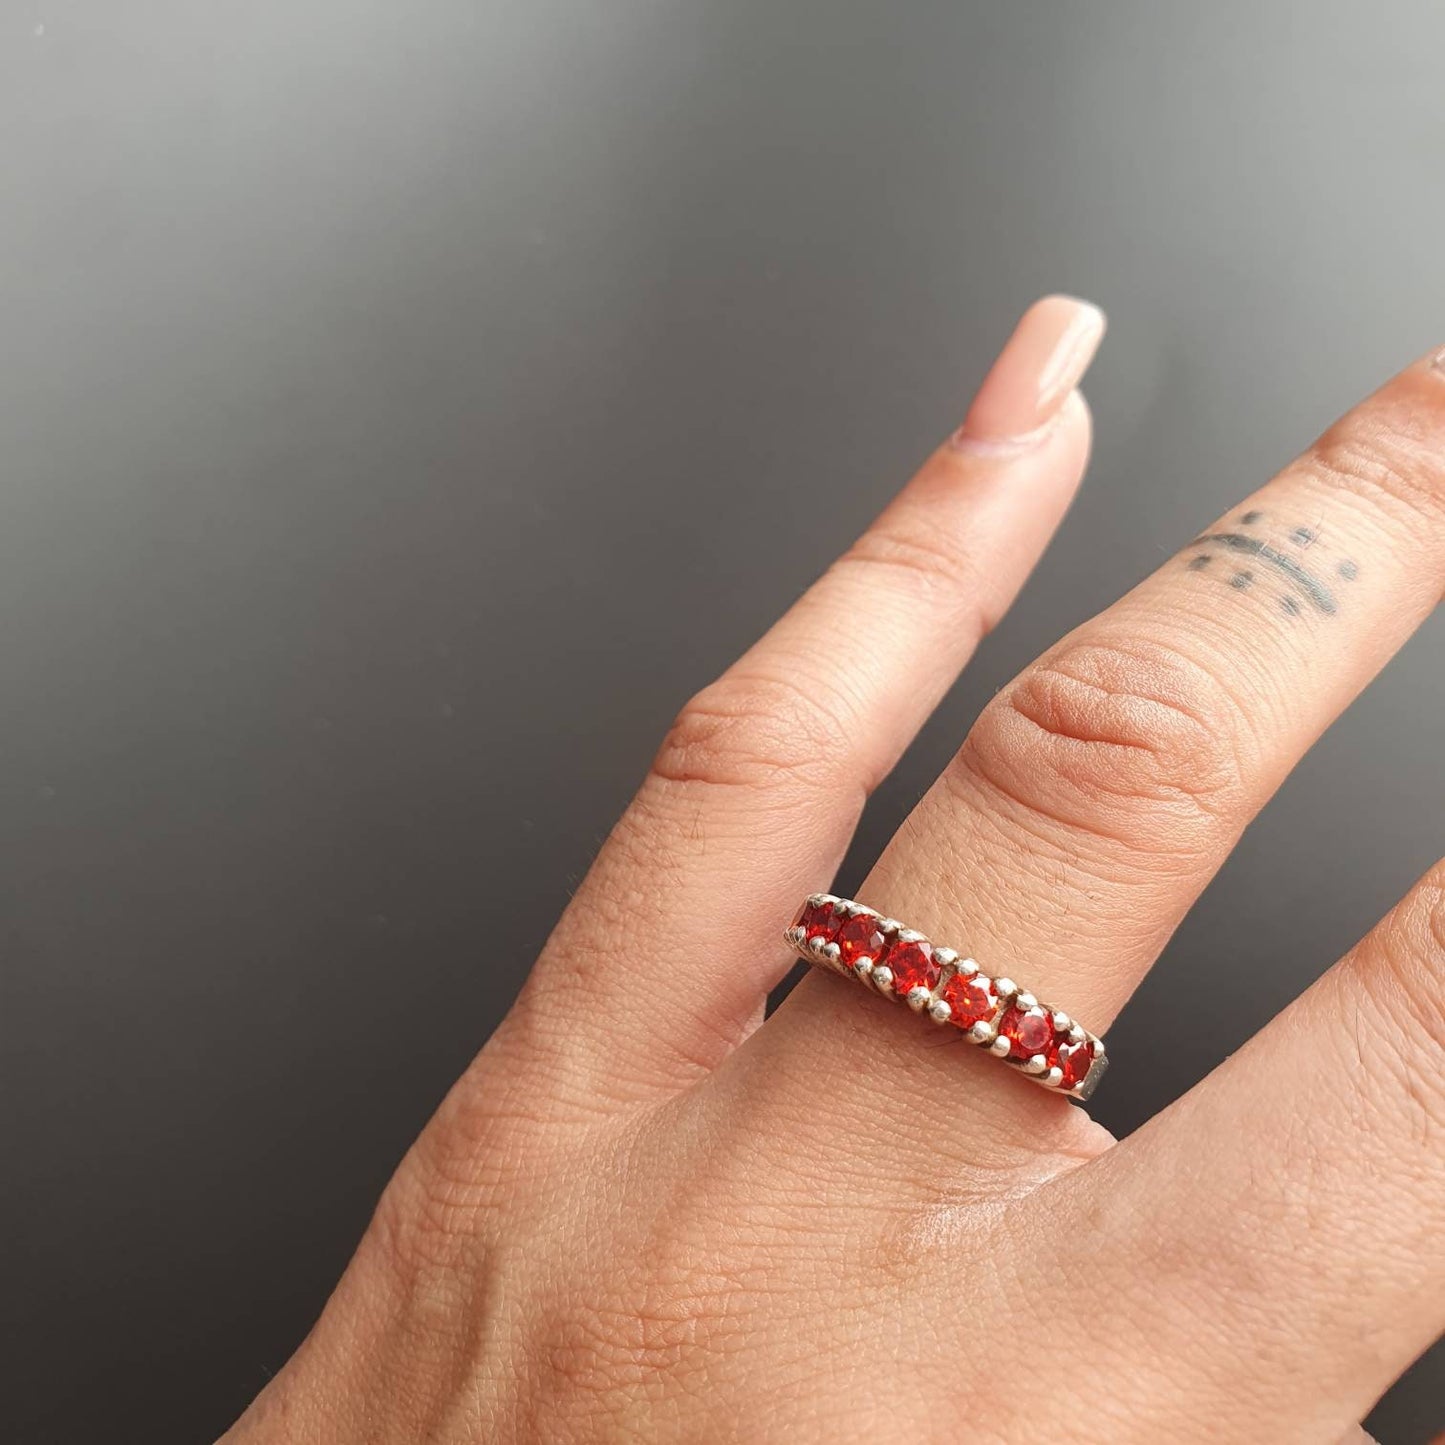 Vintage ring, statement ring, sterling silver ring,love, garnet gemstone, multi stone ring, infinity ring, gifts,red, stackable